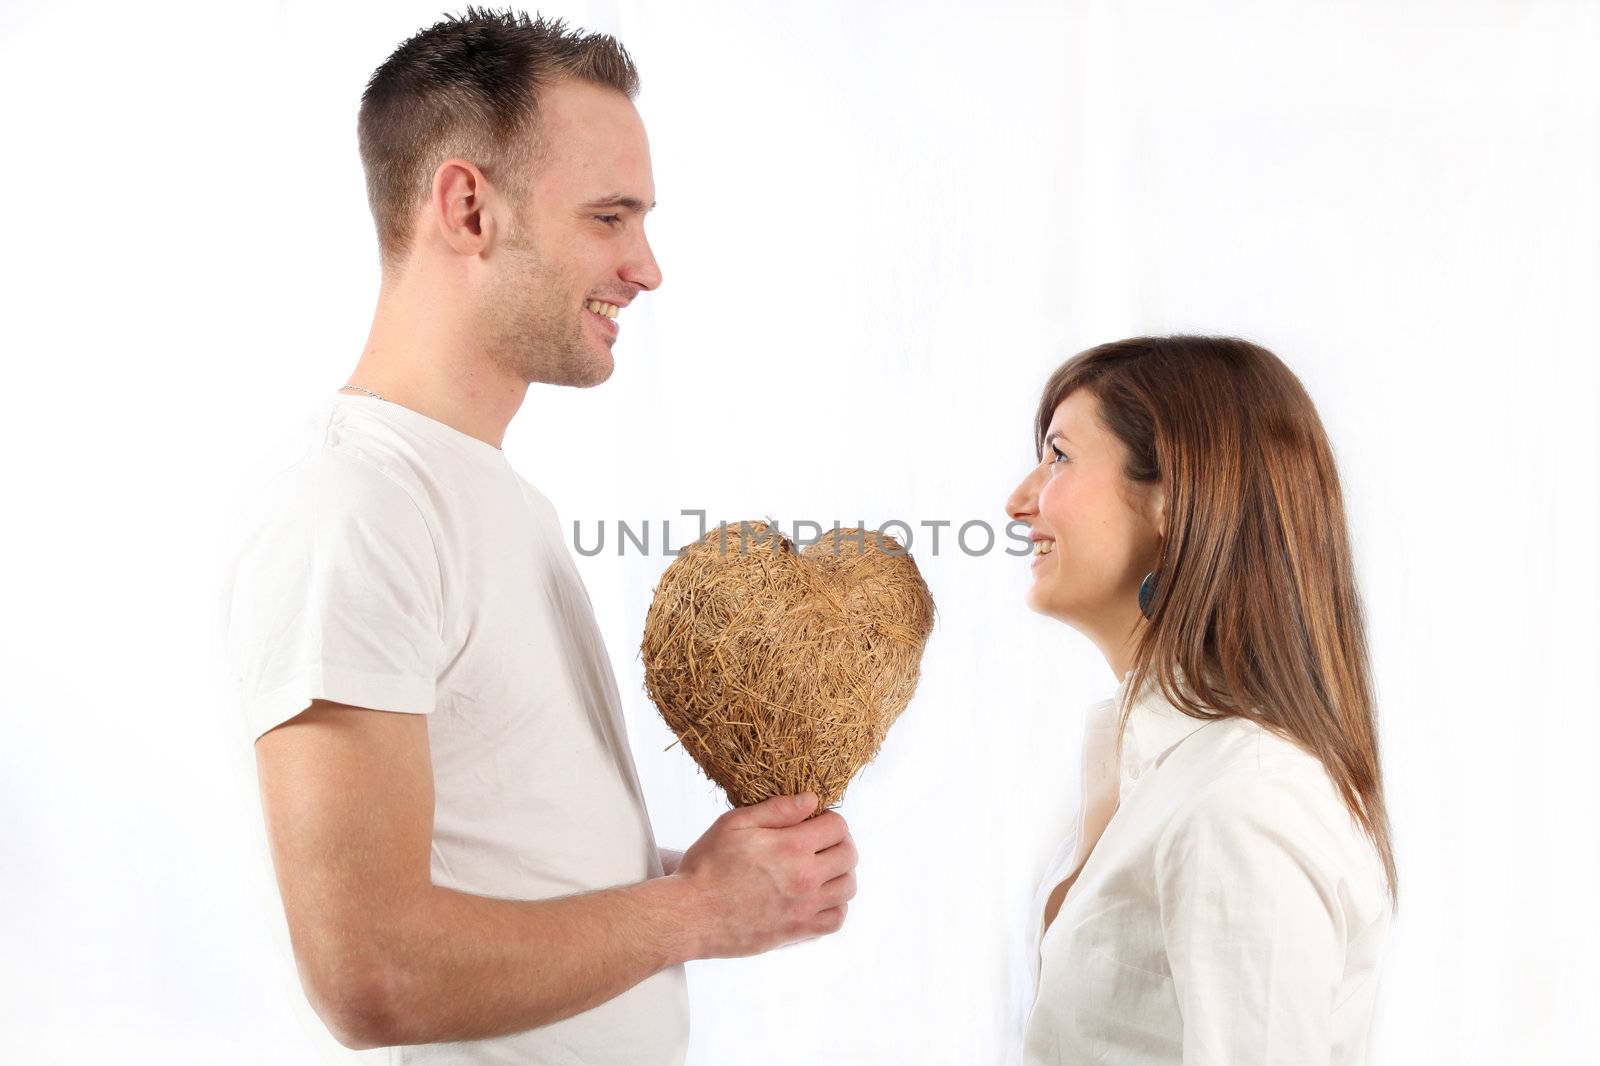 Young man handed smile of a young woman a heart made of straw and both